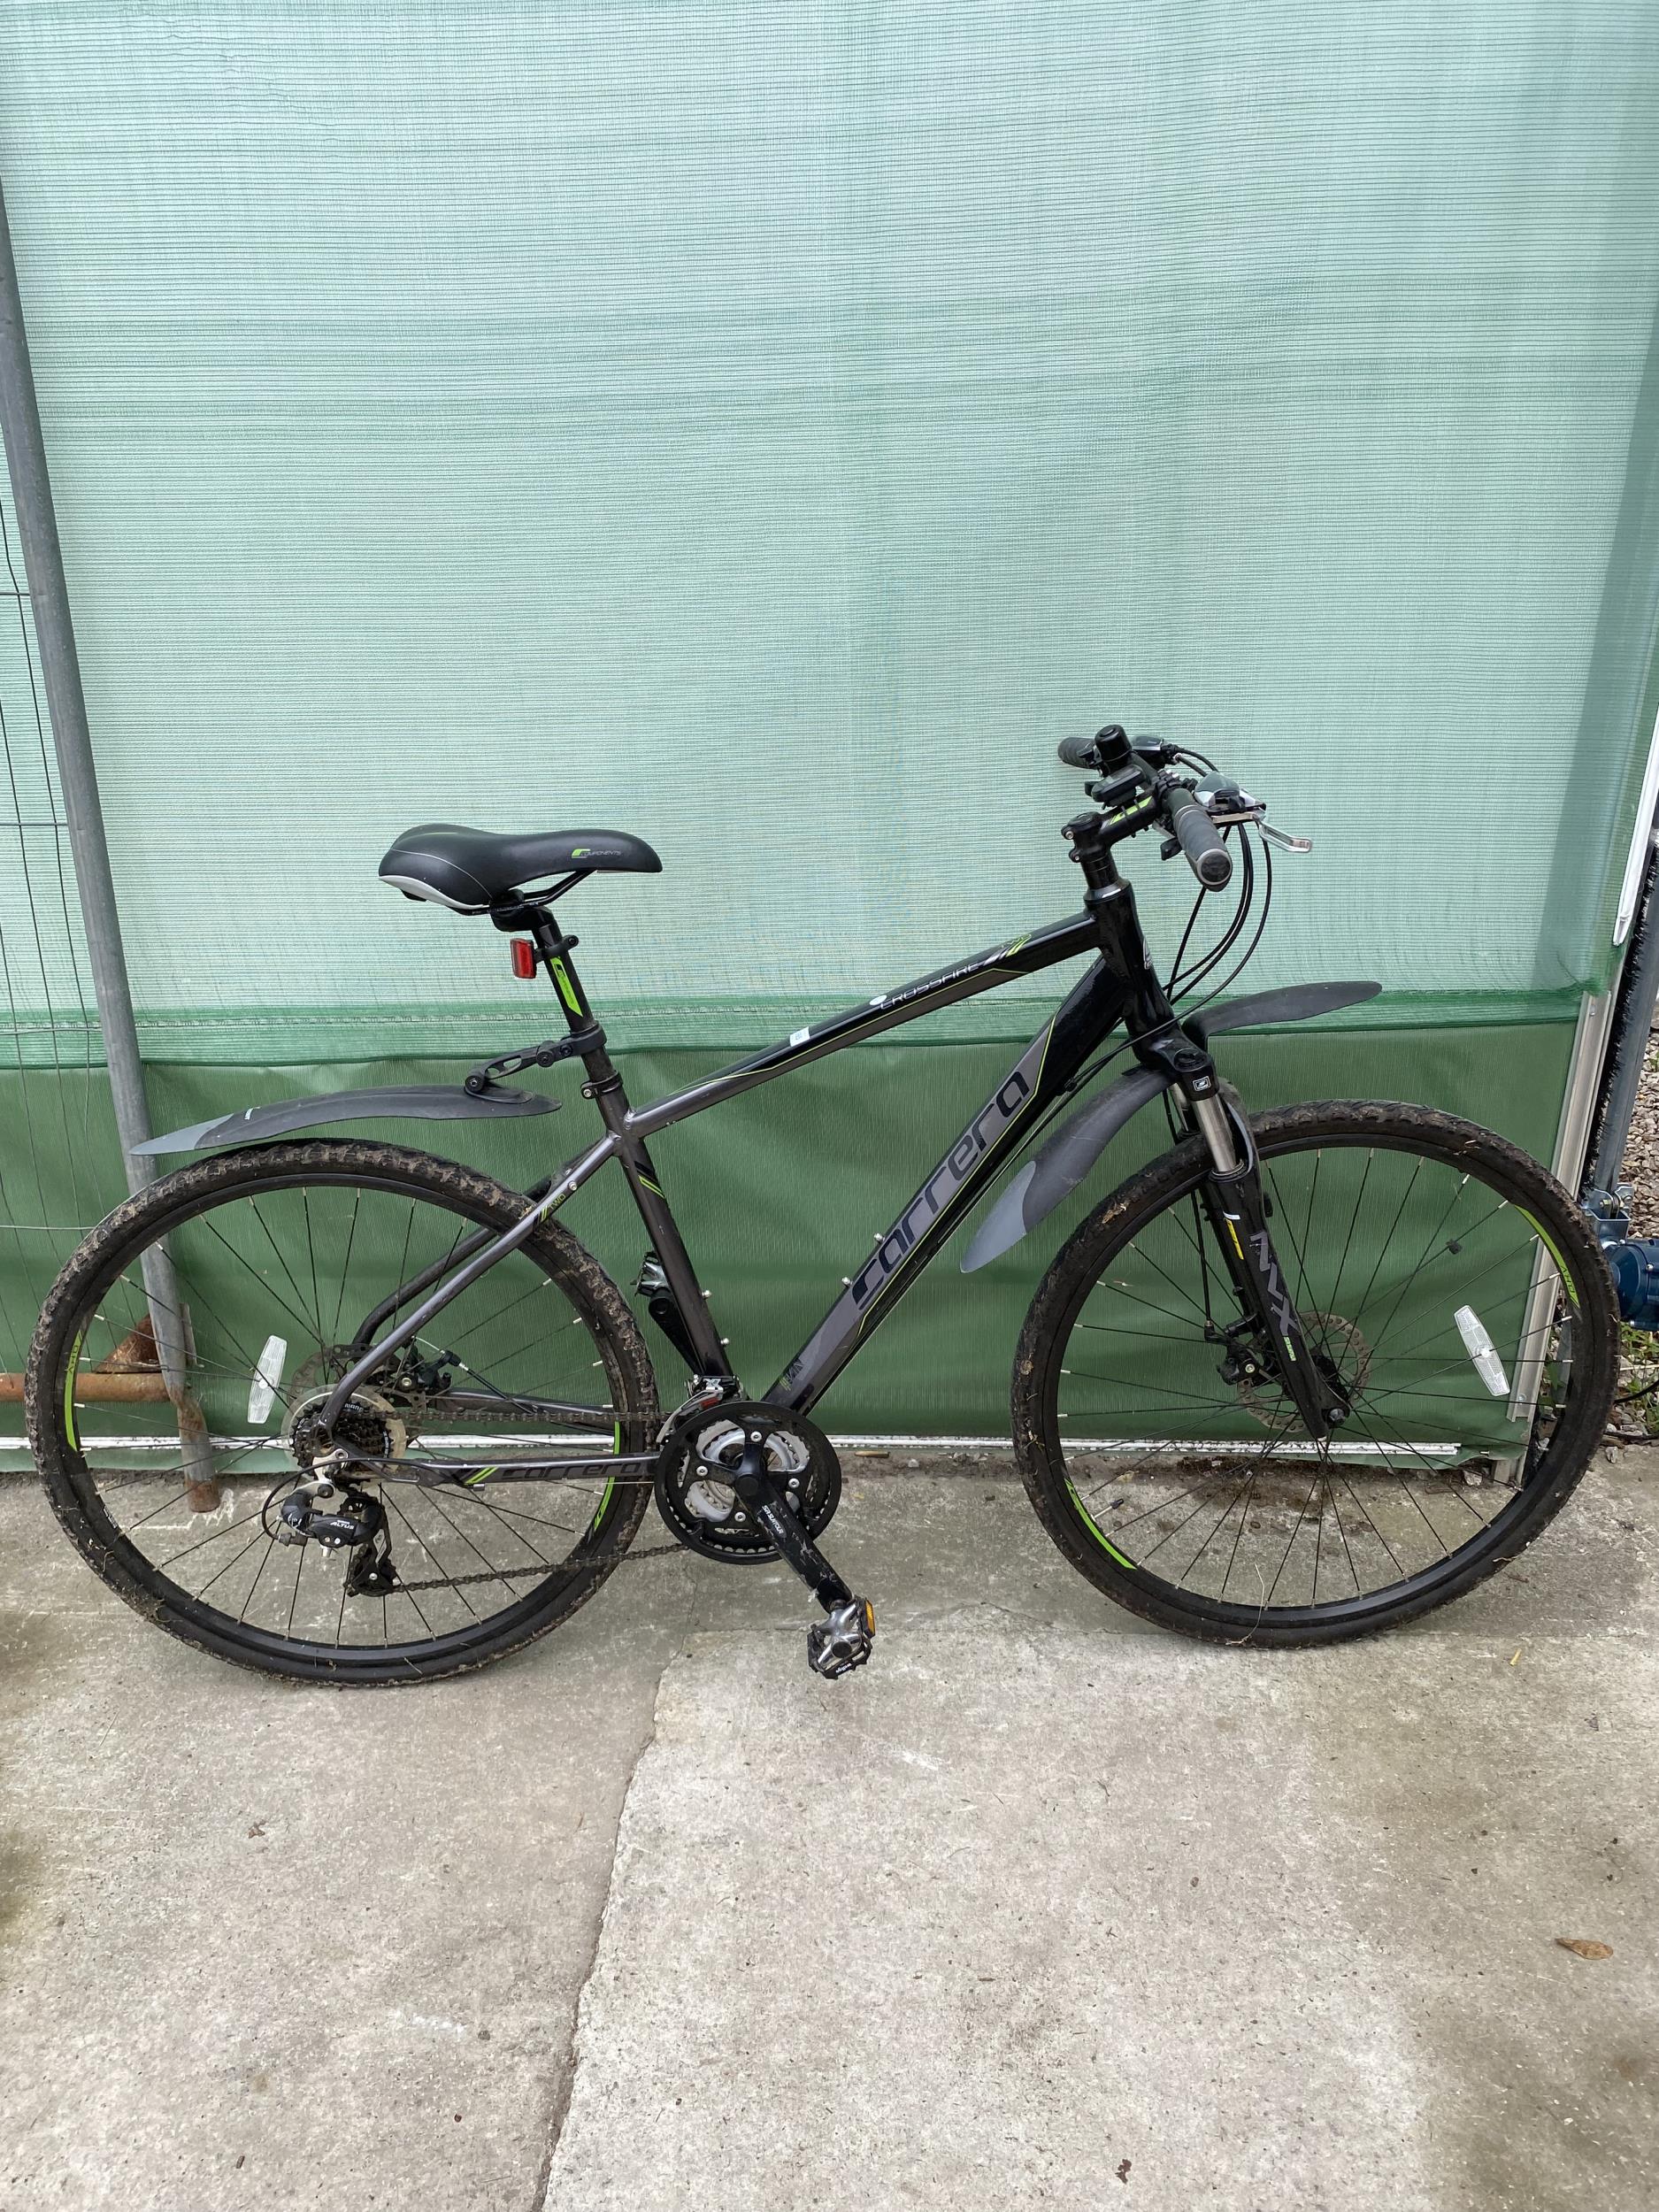 A CARRERA CROSSFIRE GENTS MOUNTAIN BIKE WITH FRONT SUSPENSION, DISC BRAKES AND 21 SPEED SHIMANO GEAR